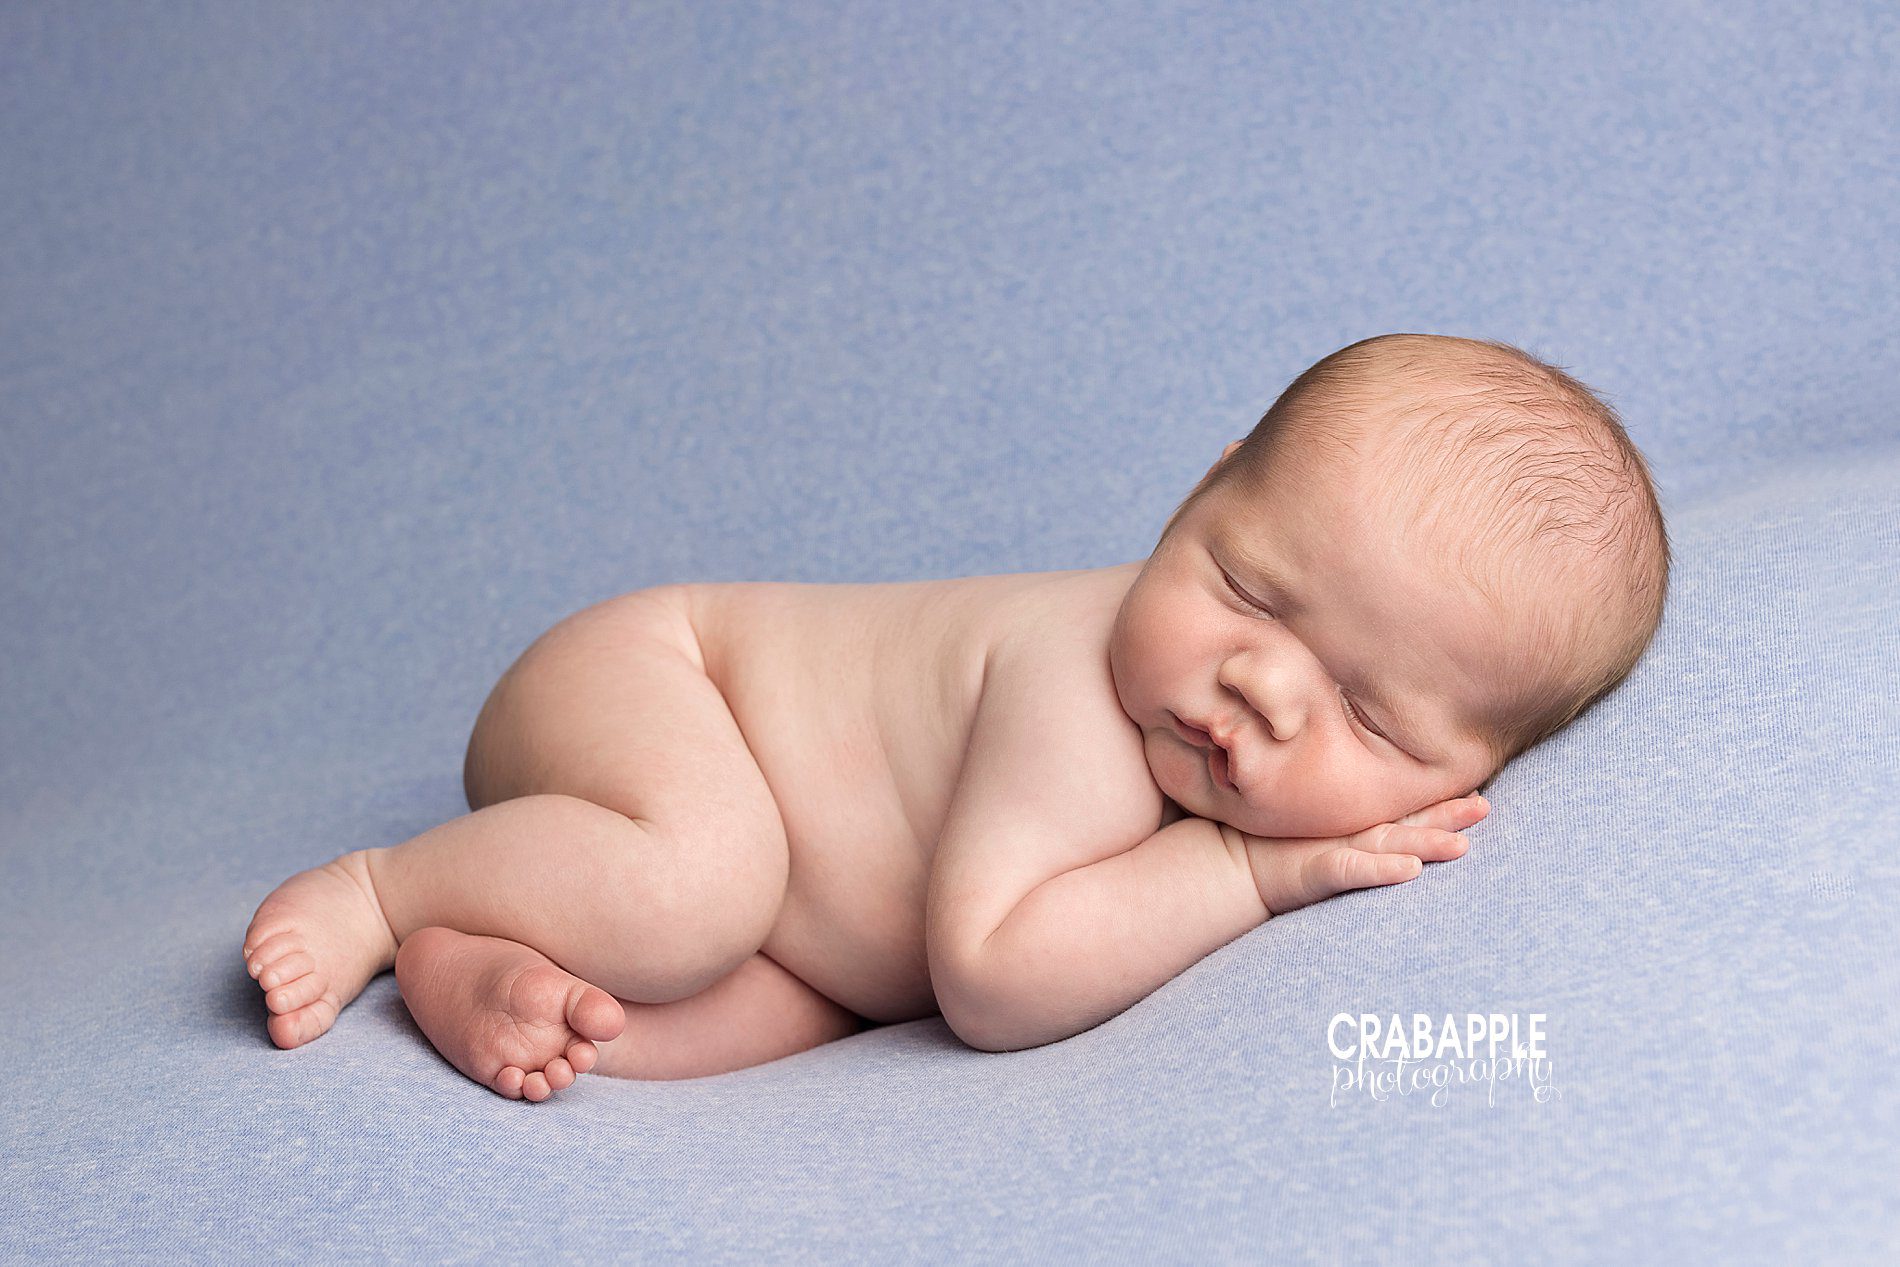 Clean and simple ideas for newborn portraits